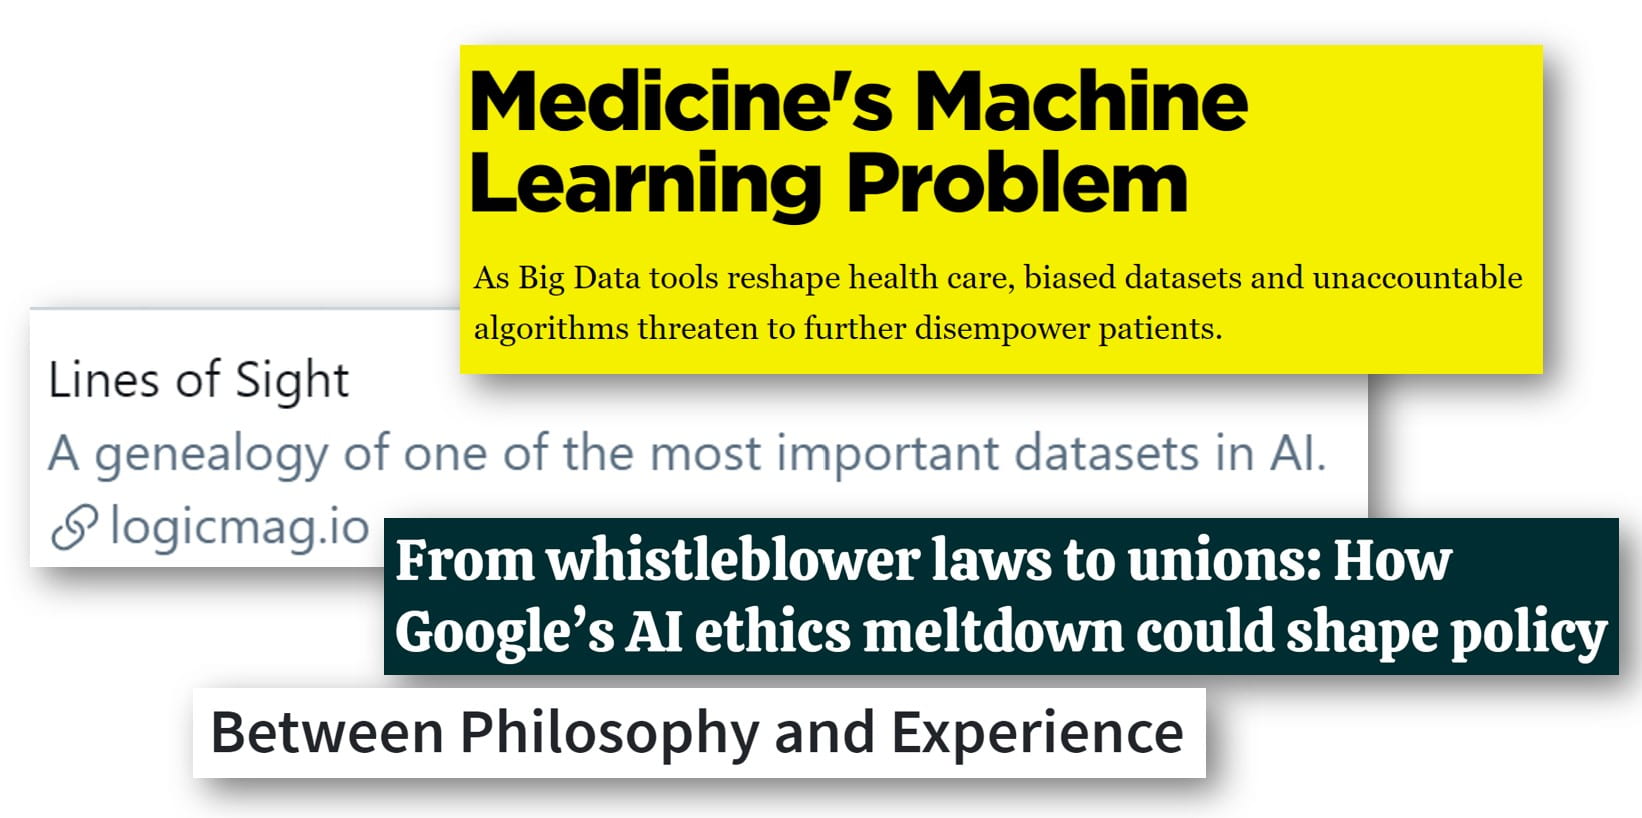 CADE Link Round-Up: Medicine’s Machine Learning Problem, A Genealogy of ImageNet, How Google’s Meltdown Could Shape Policy